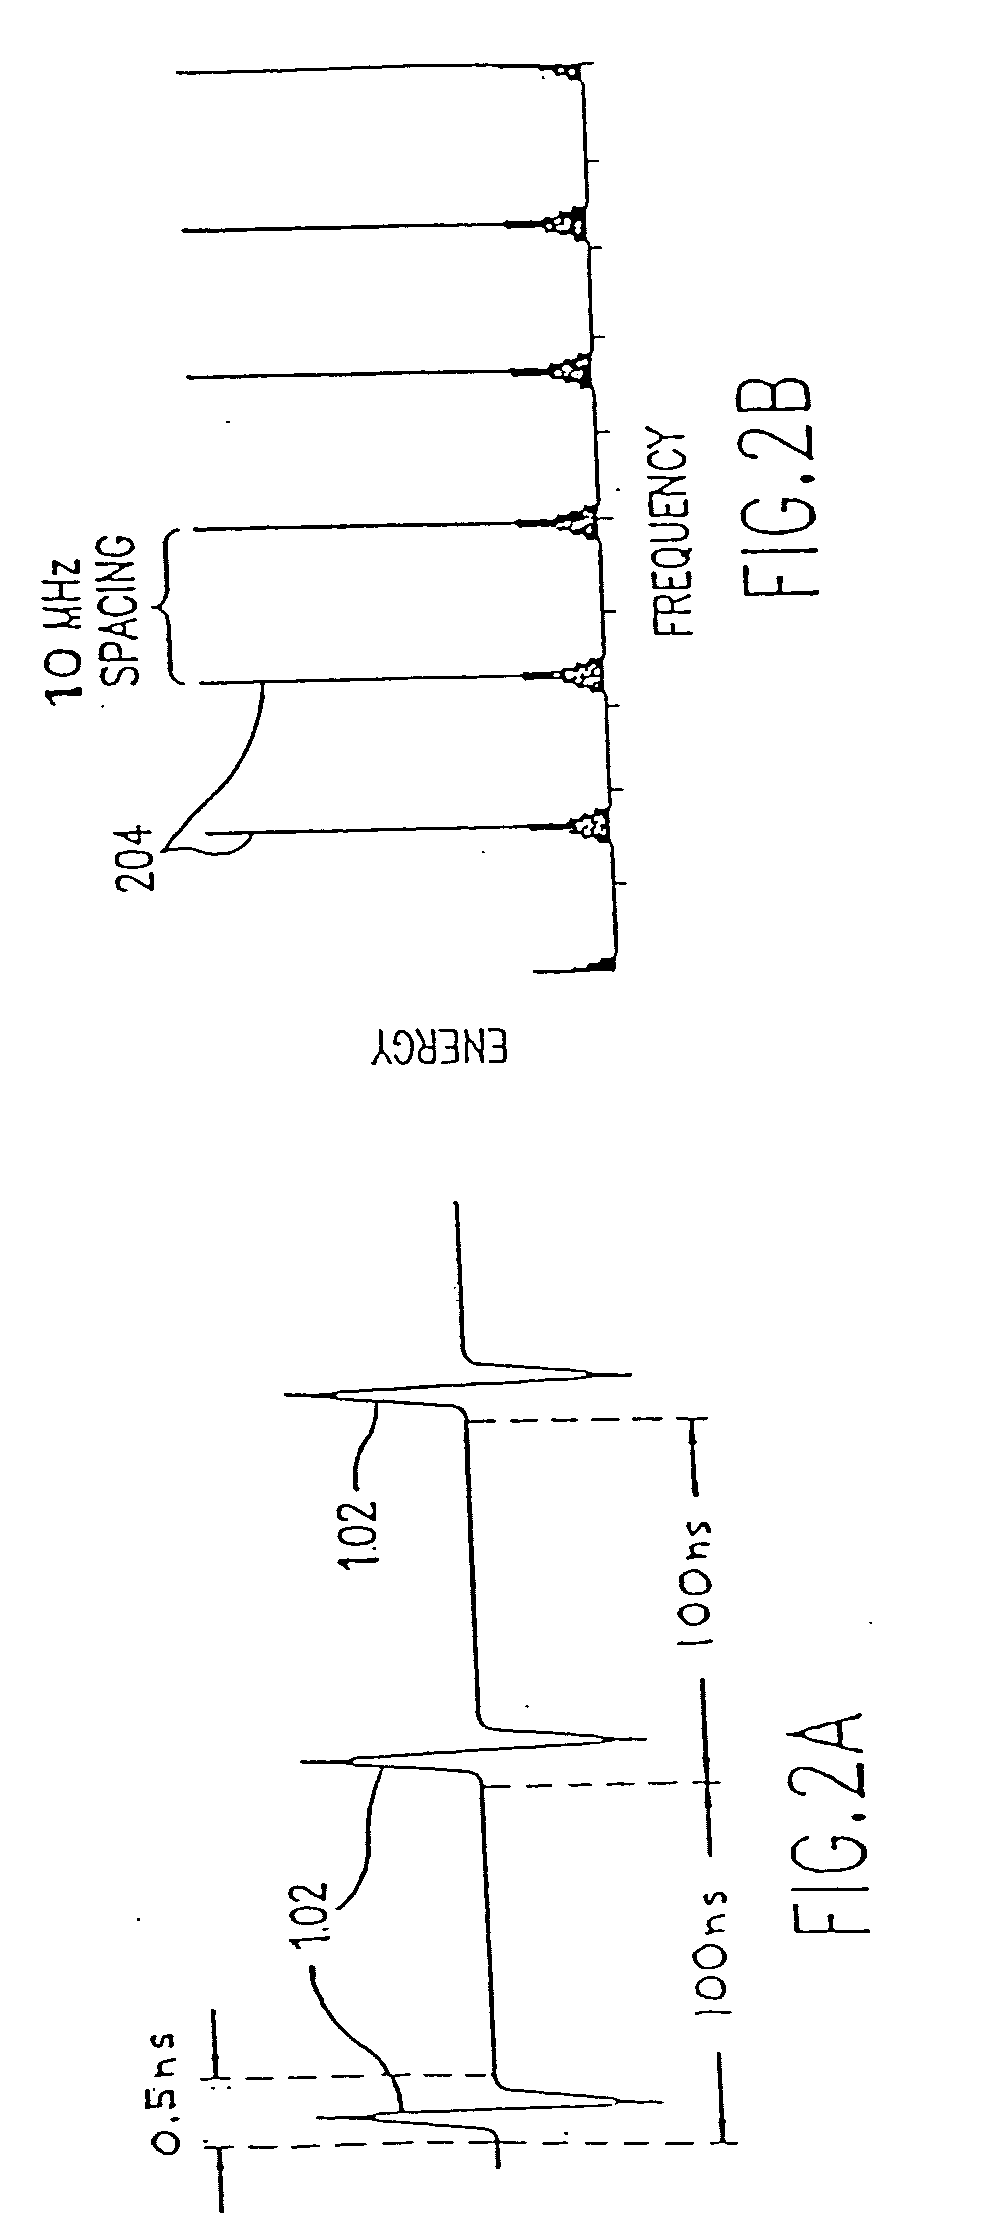 System and method for a virtual wireless local area network